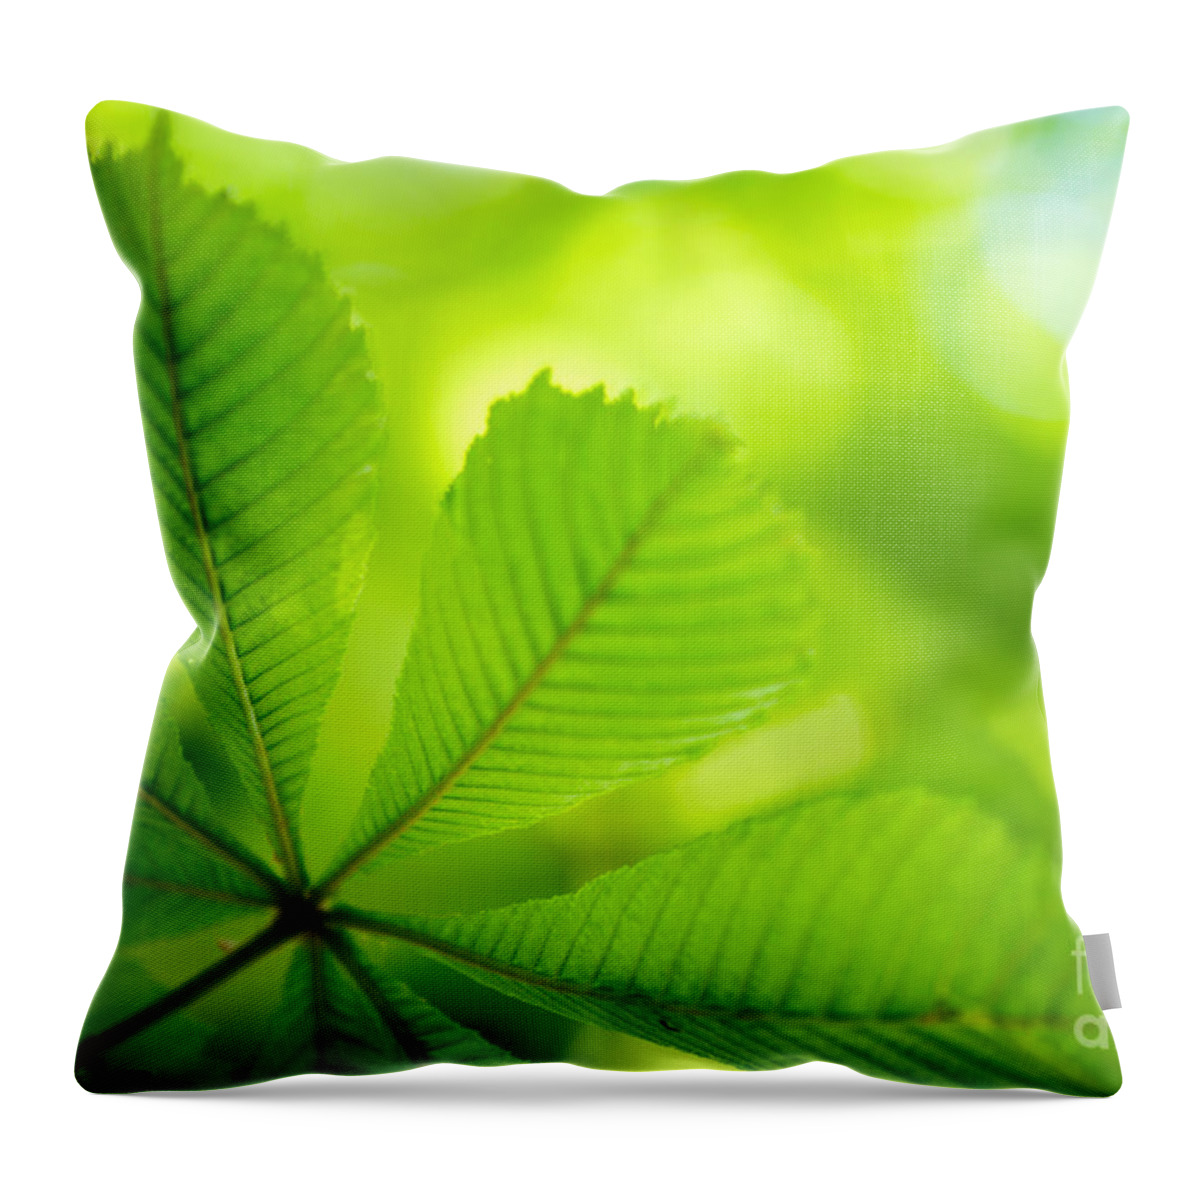 Conker Throw Pillow featuring the photograph Spring Green by Nailia Schwarz